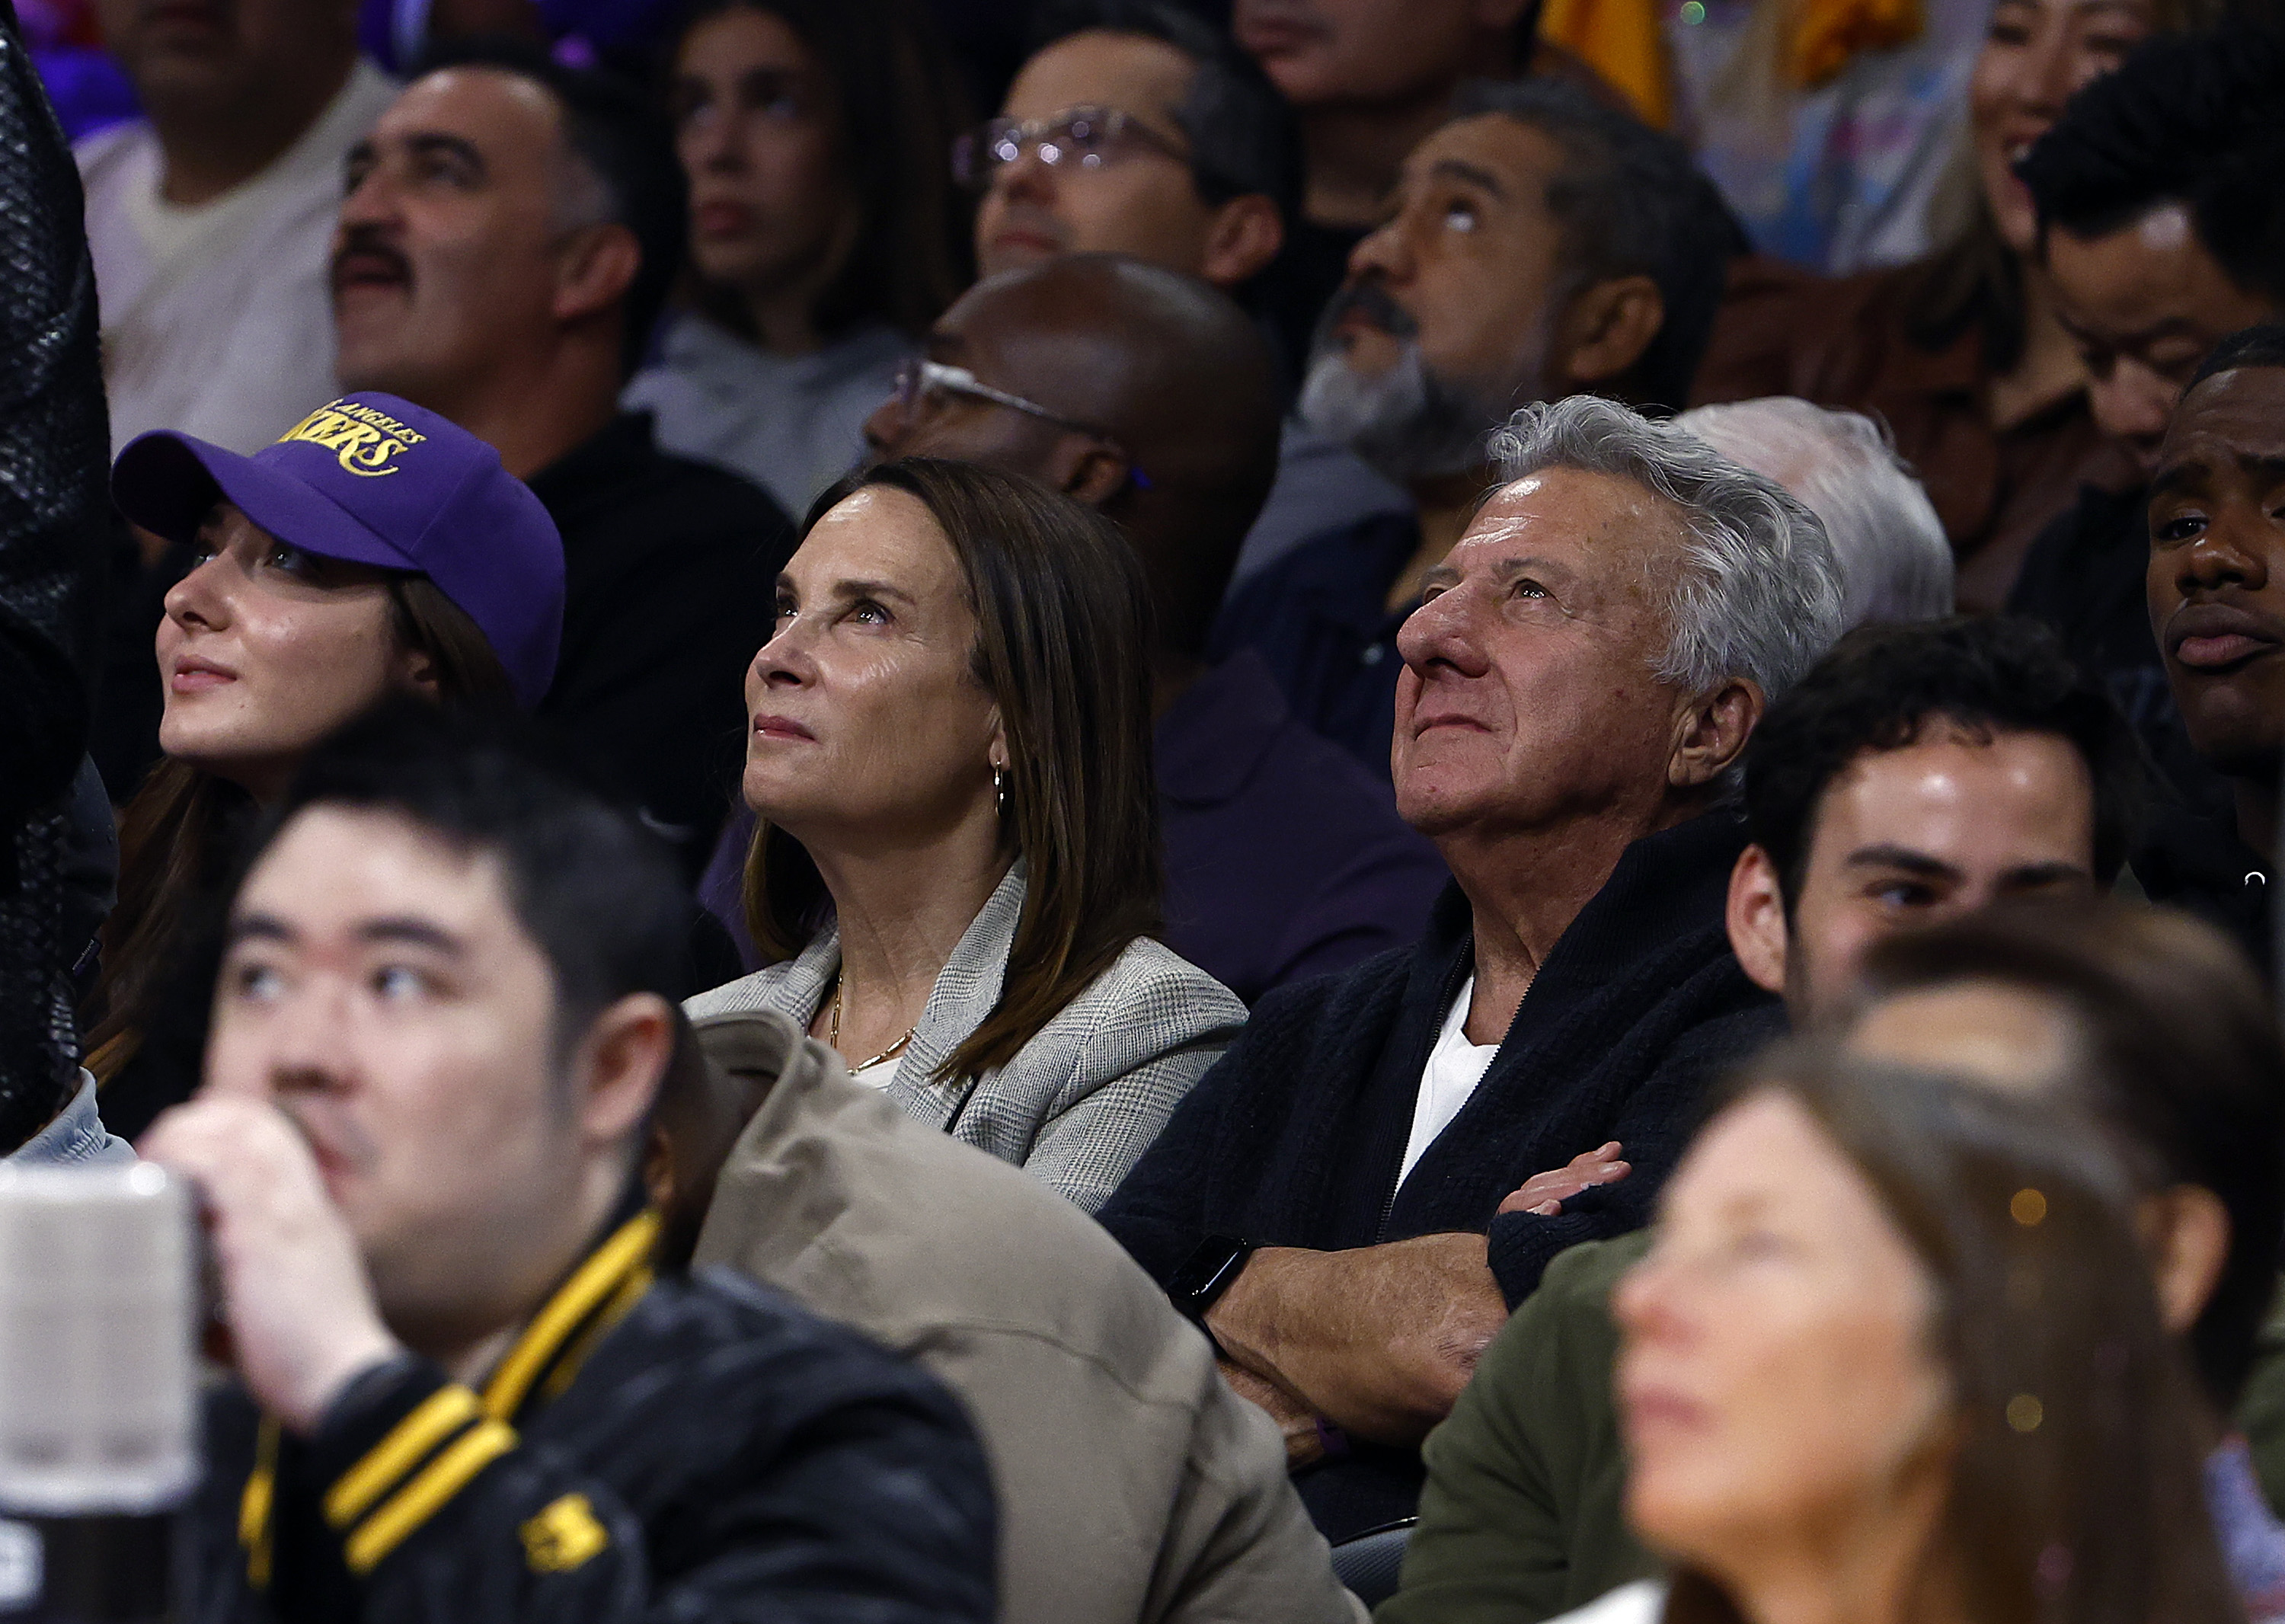 Lisa Hoffman and Dustin Hoffman at a game between the LA Clippers and the Los Angeles Lakers in the fourth quarter in Los Angeles, California on October 20, 2022. | Source: Getty Images